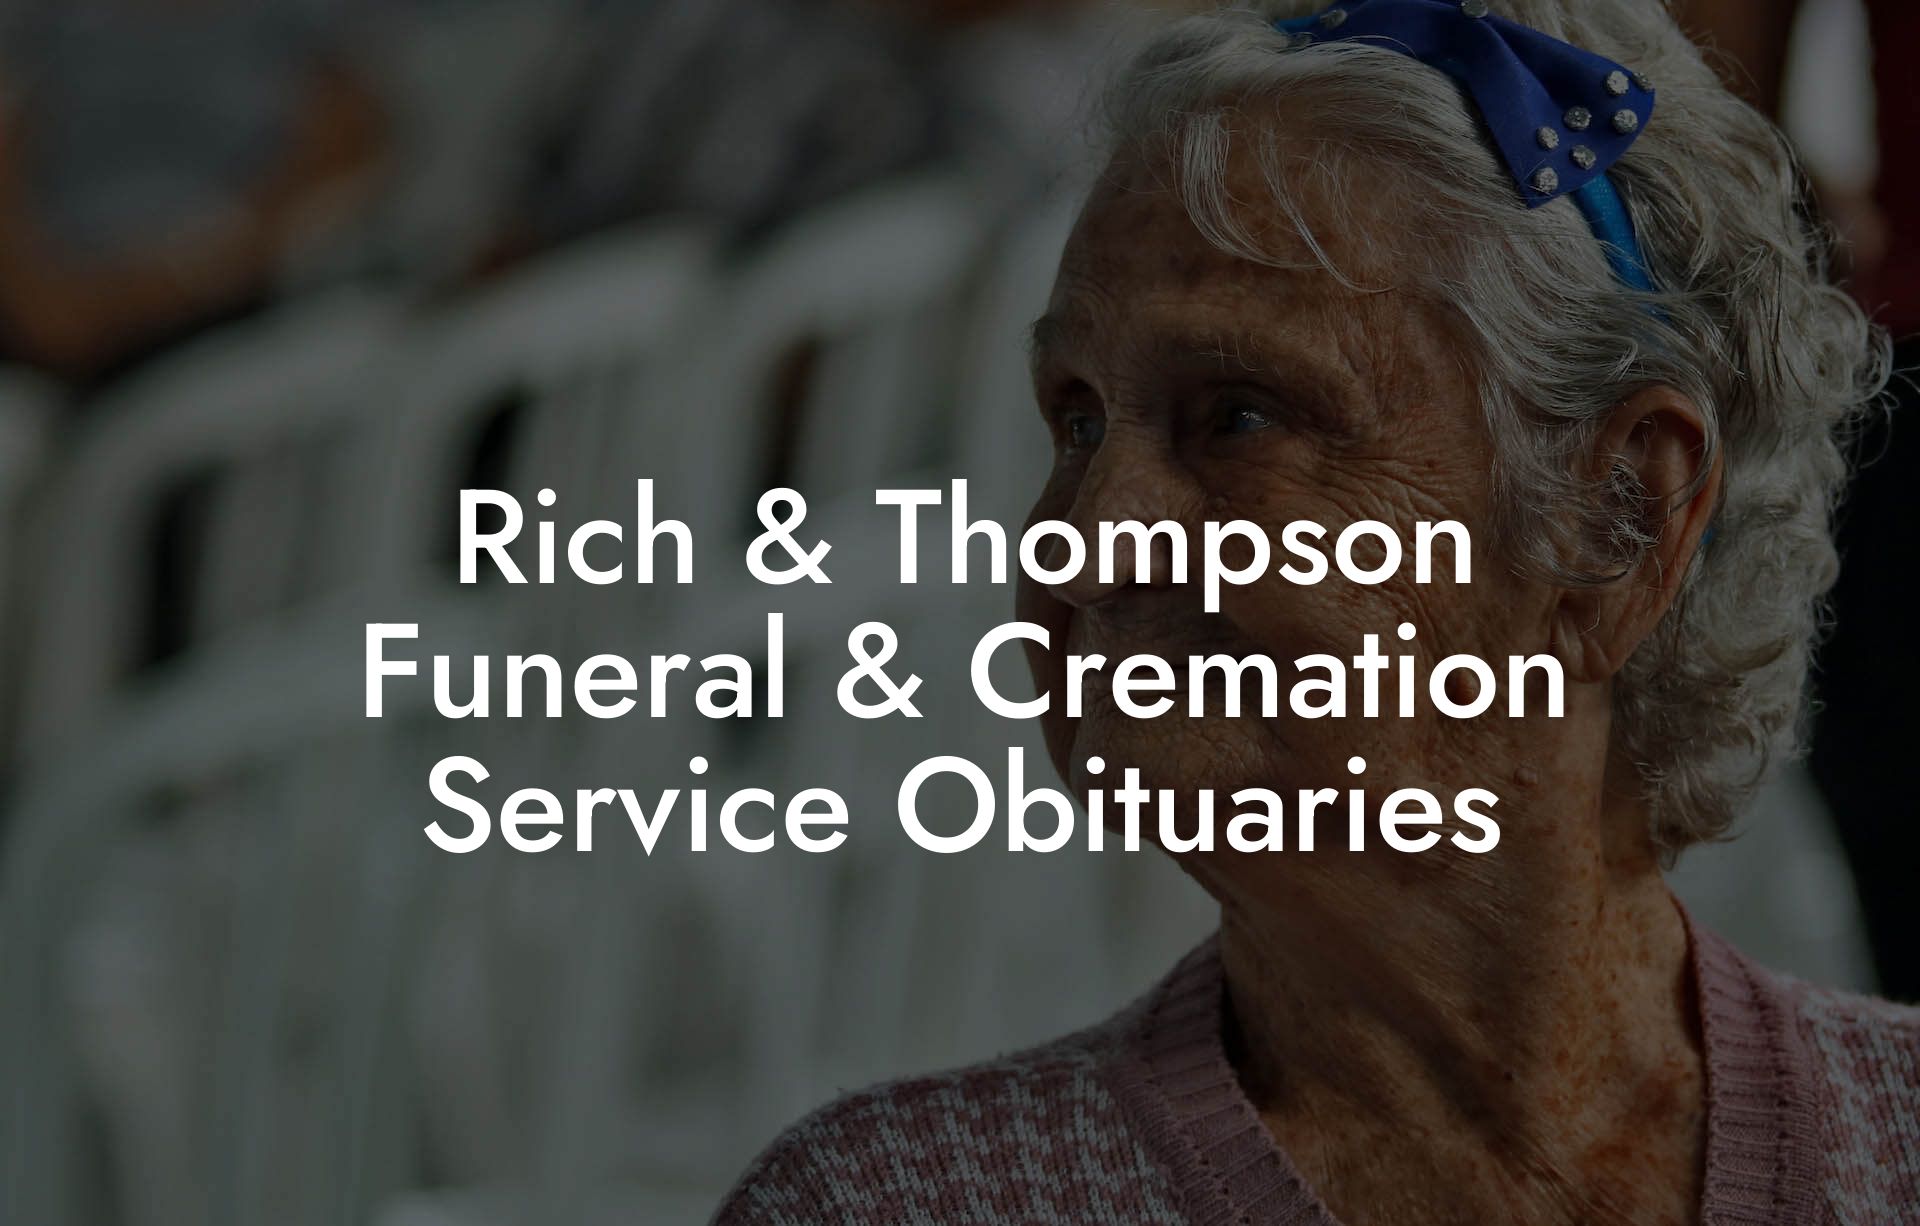 Rich & Thompson Funeral & Cremation Service Obituaries